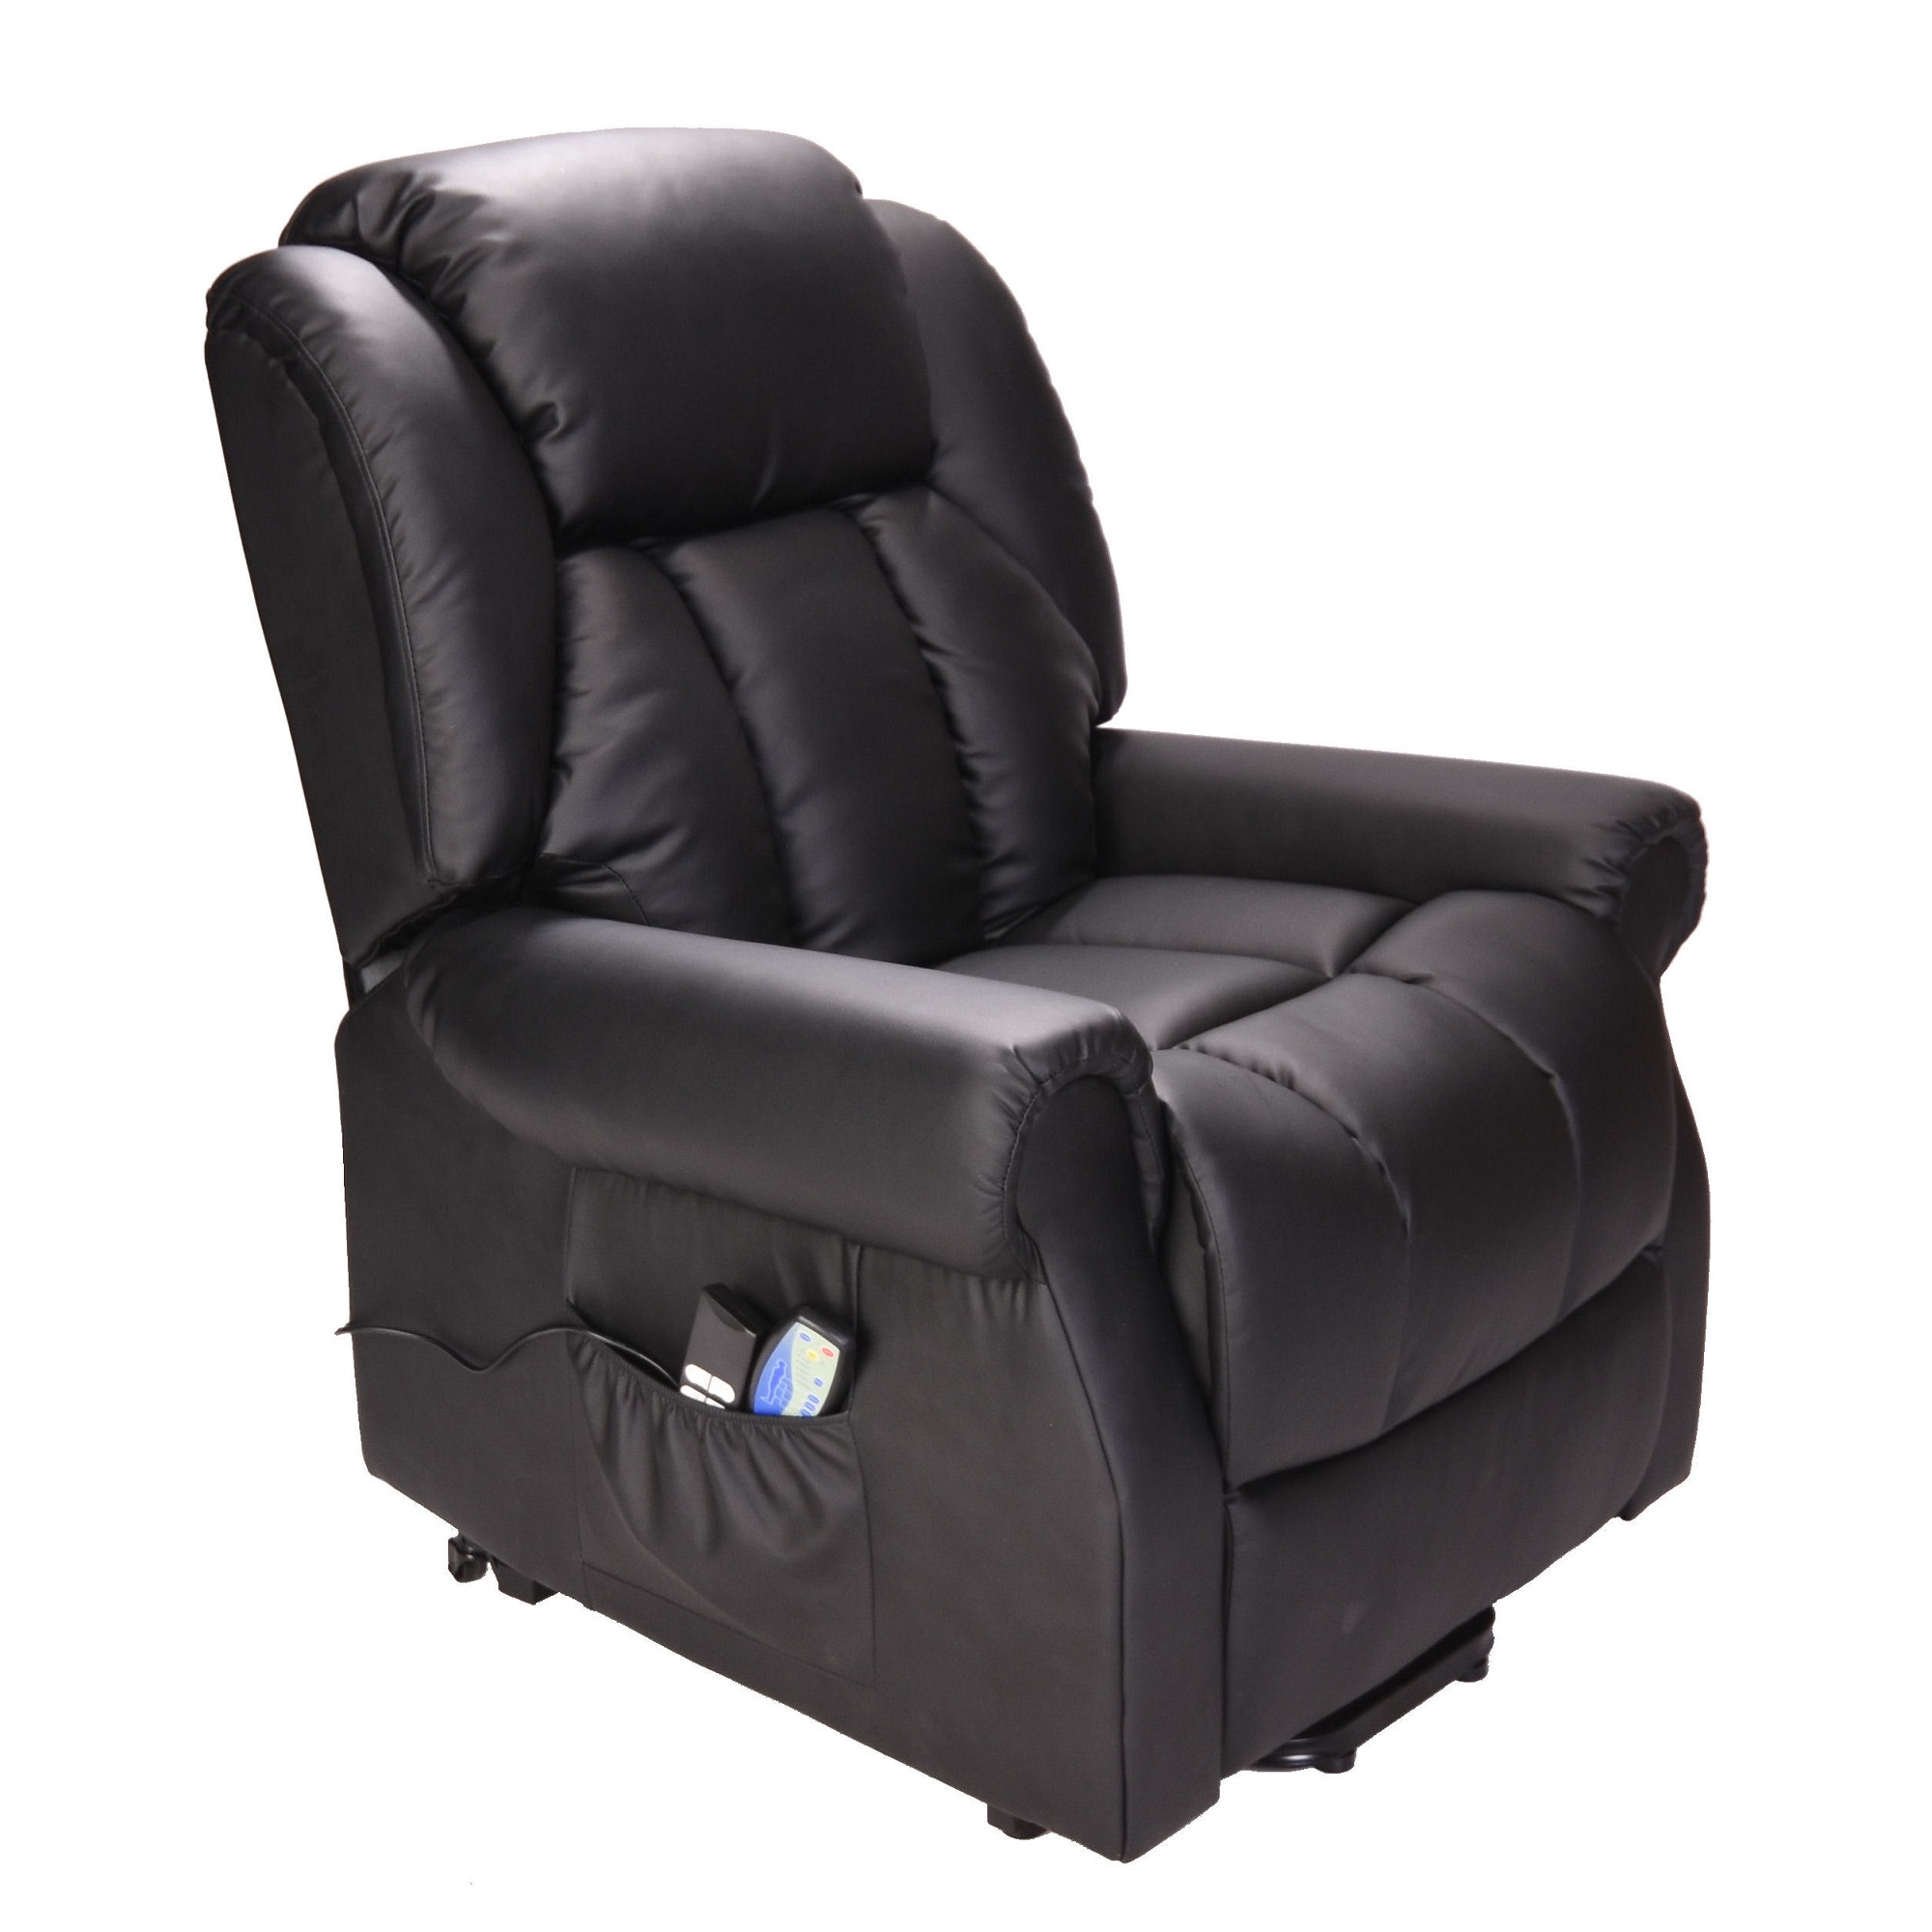 Hainworth Dual Motor Riser And Recliner, Reclining Massage Chair With Heat Uk